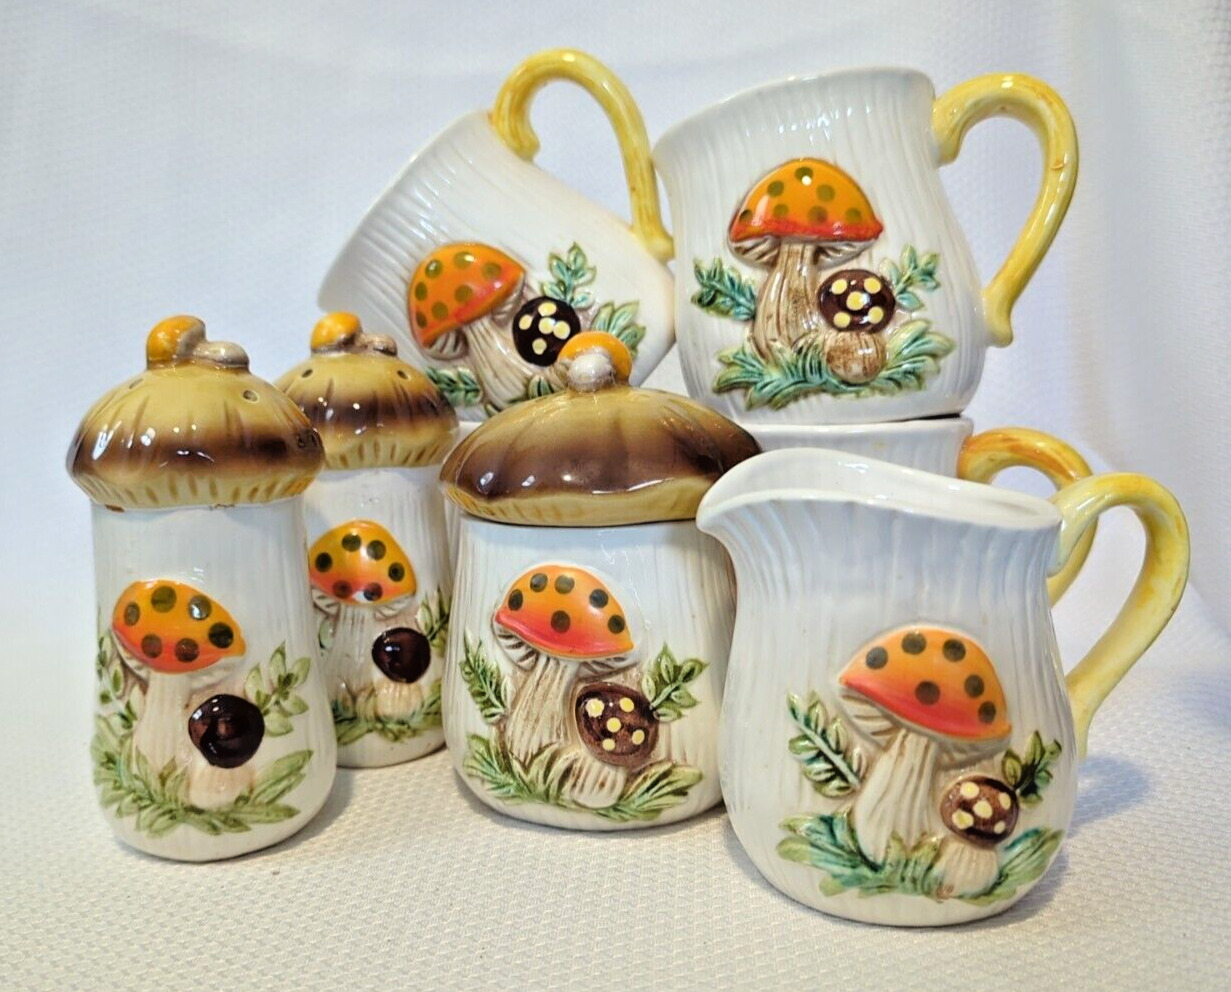 1976 Sears. Roebuck & Co Merry Mushroom Cups with Salt and Pepper Shakers 